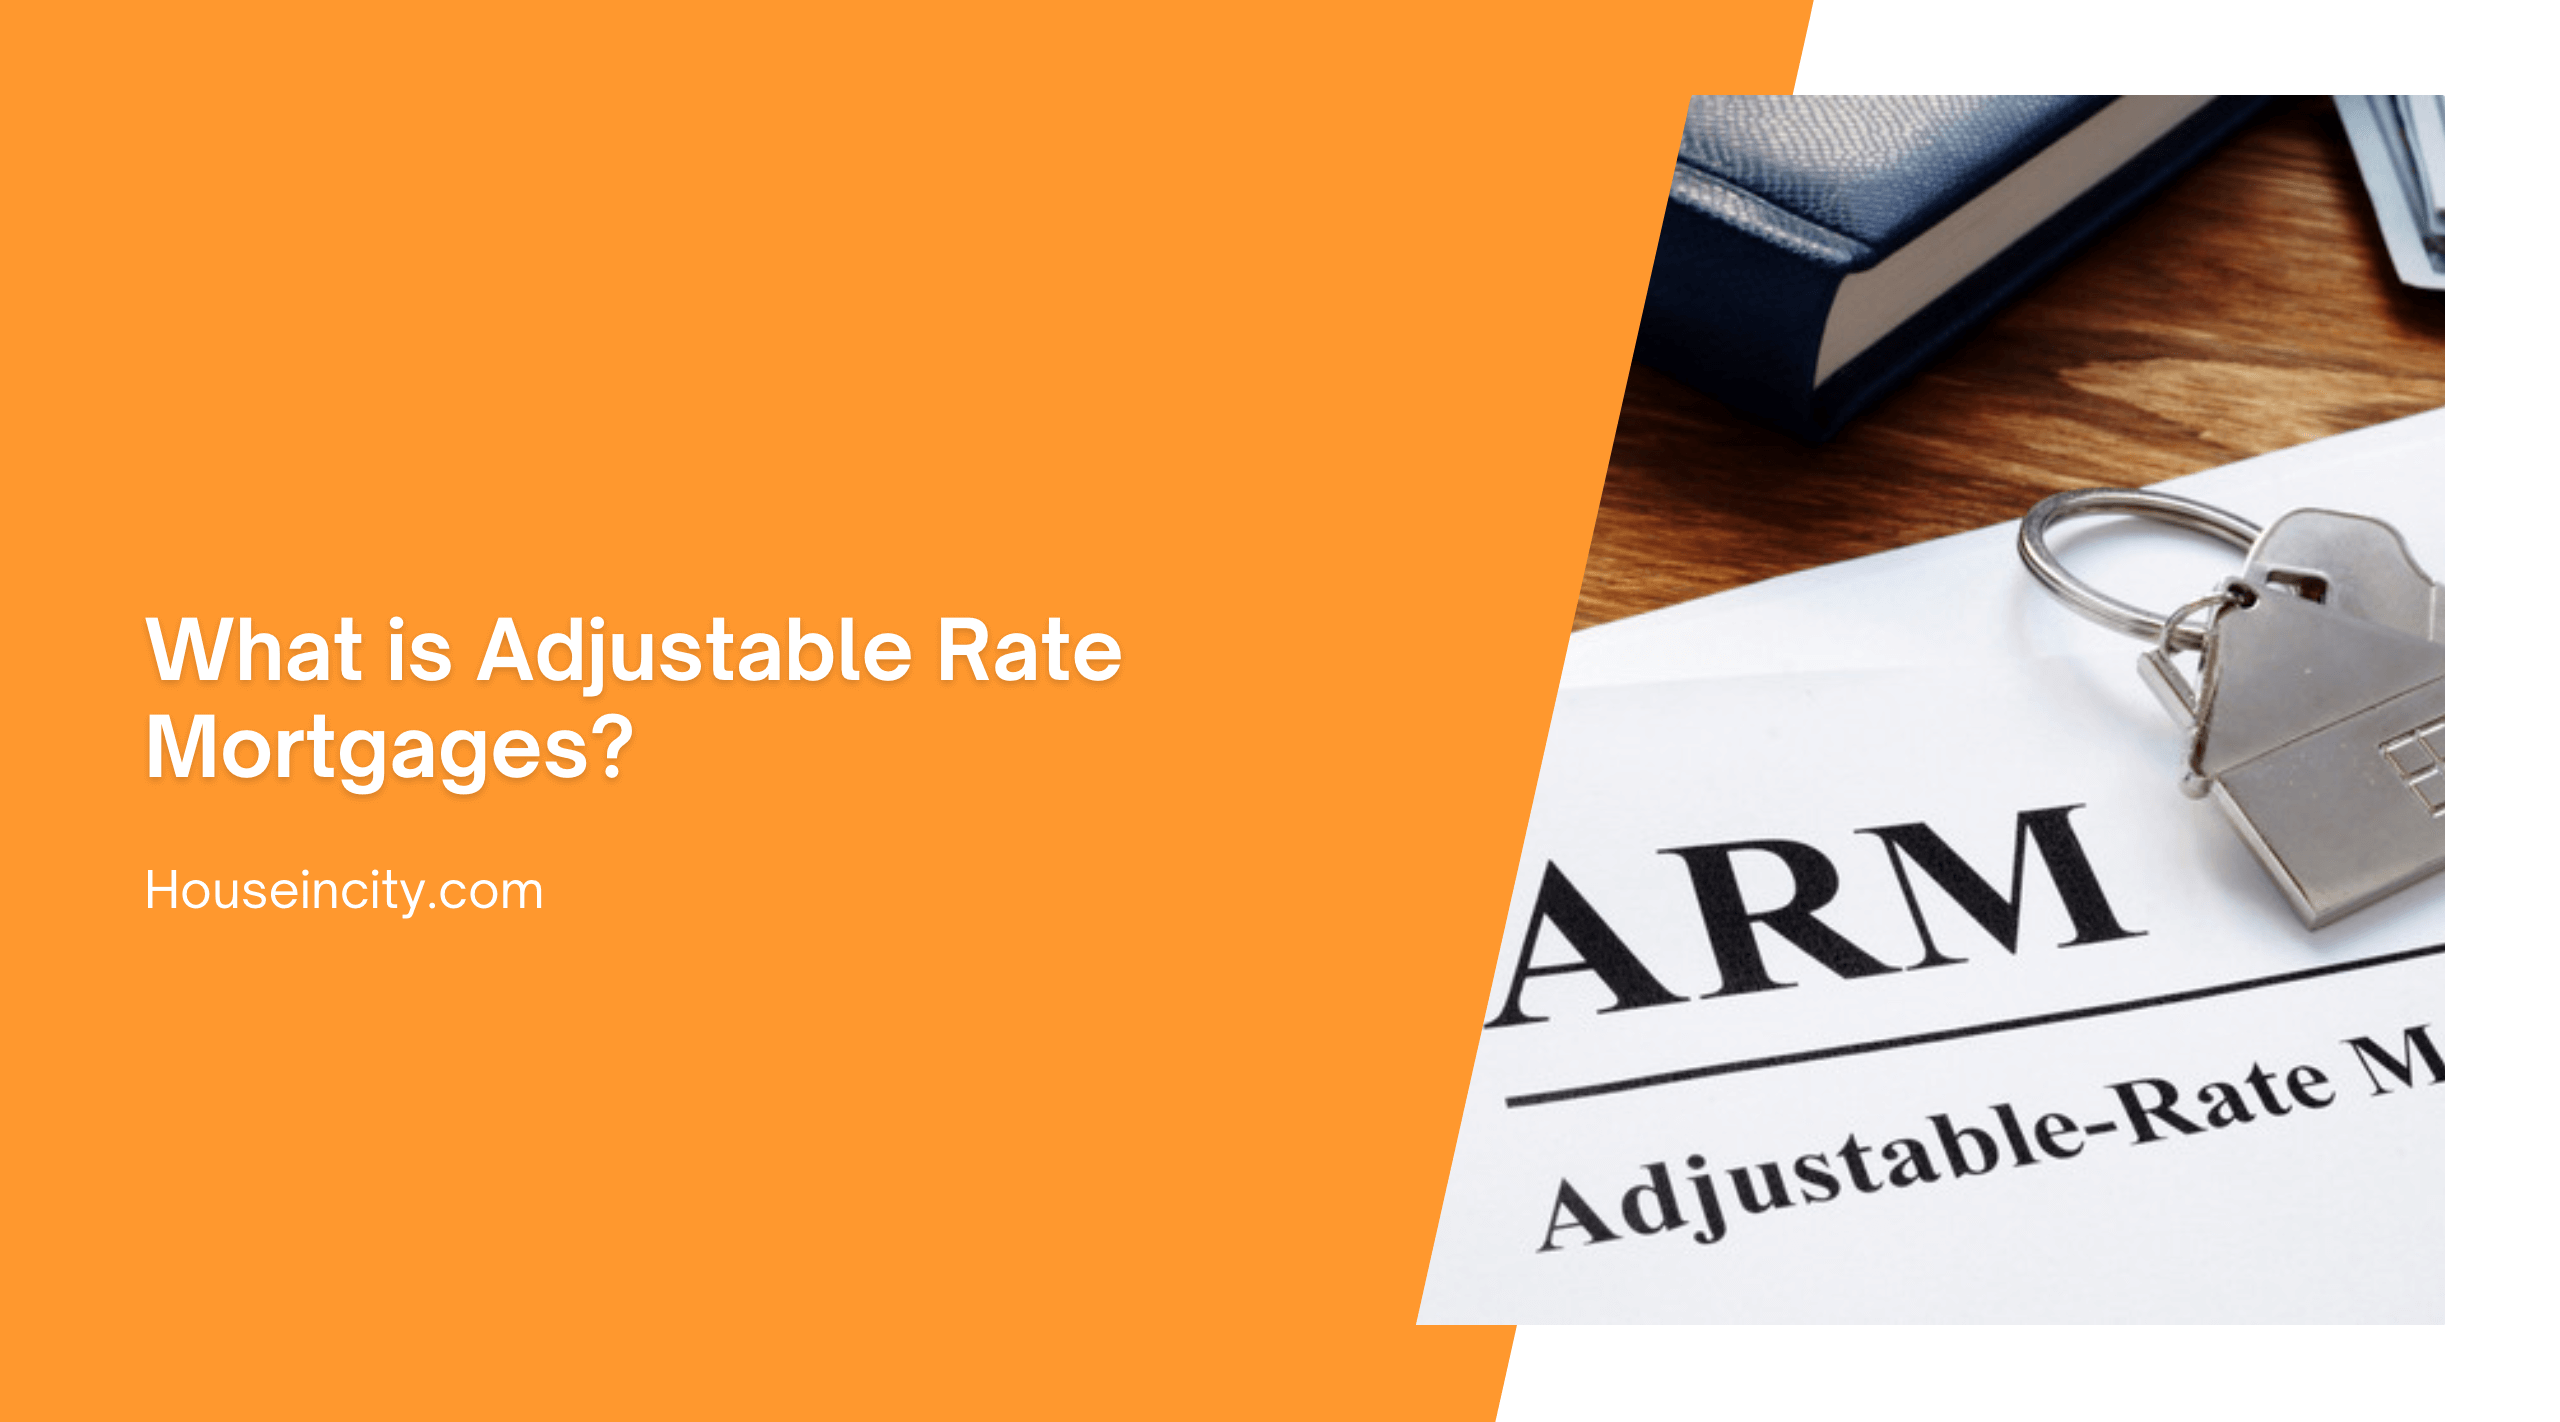 What is Adjustable Rate Mortgages?